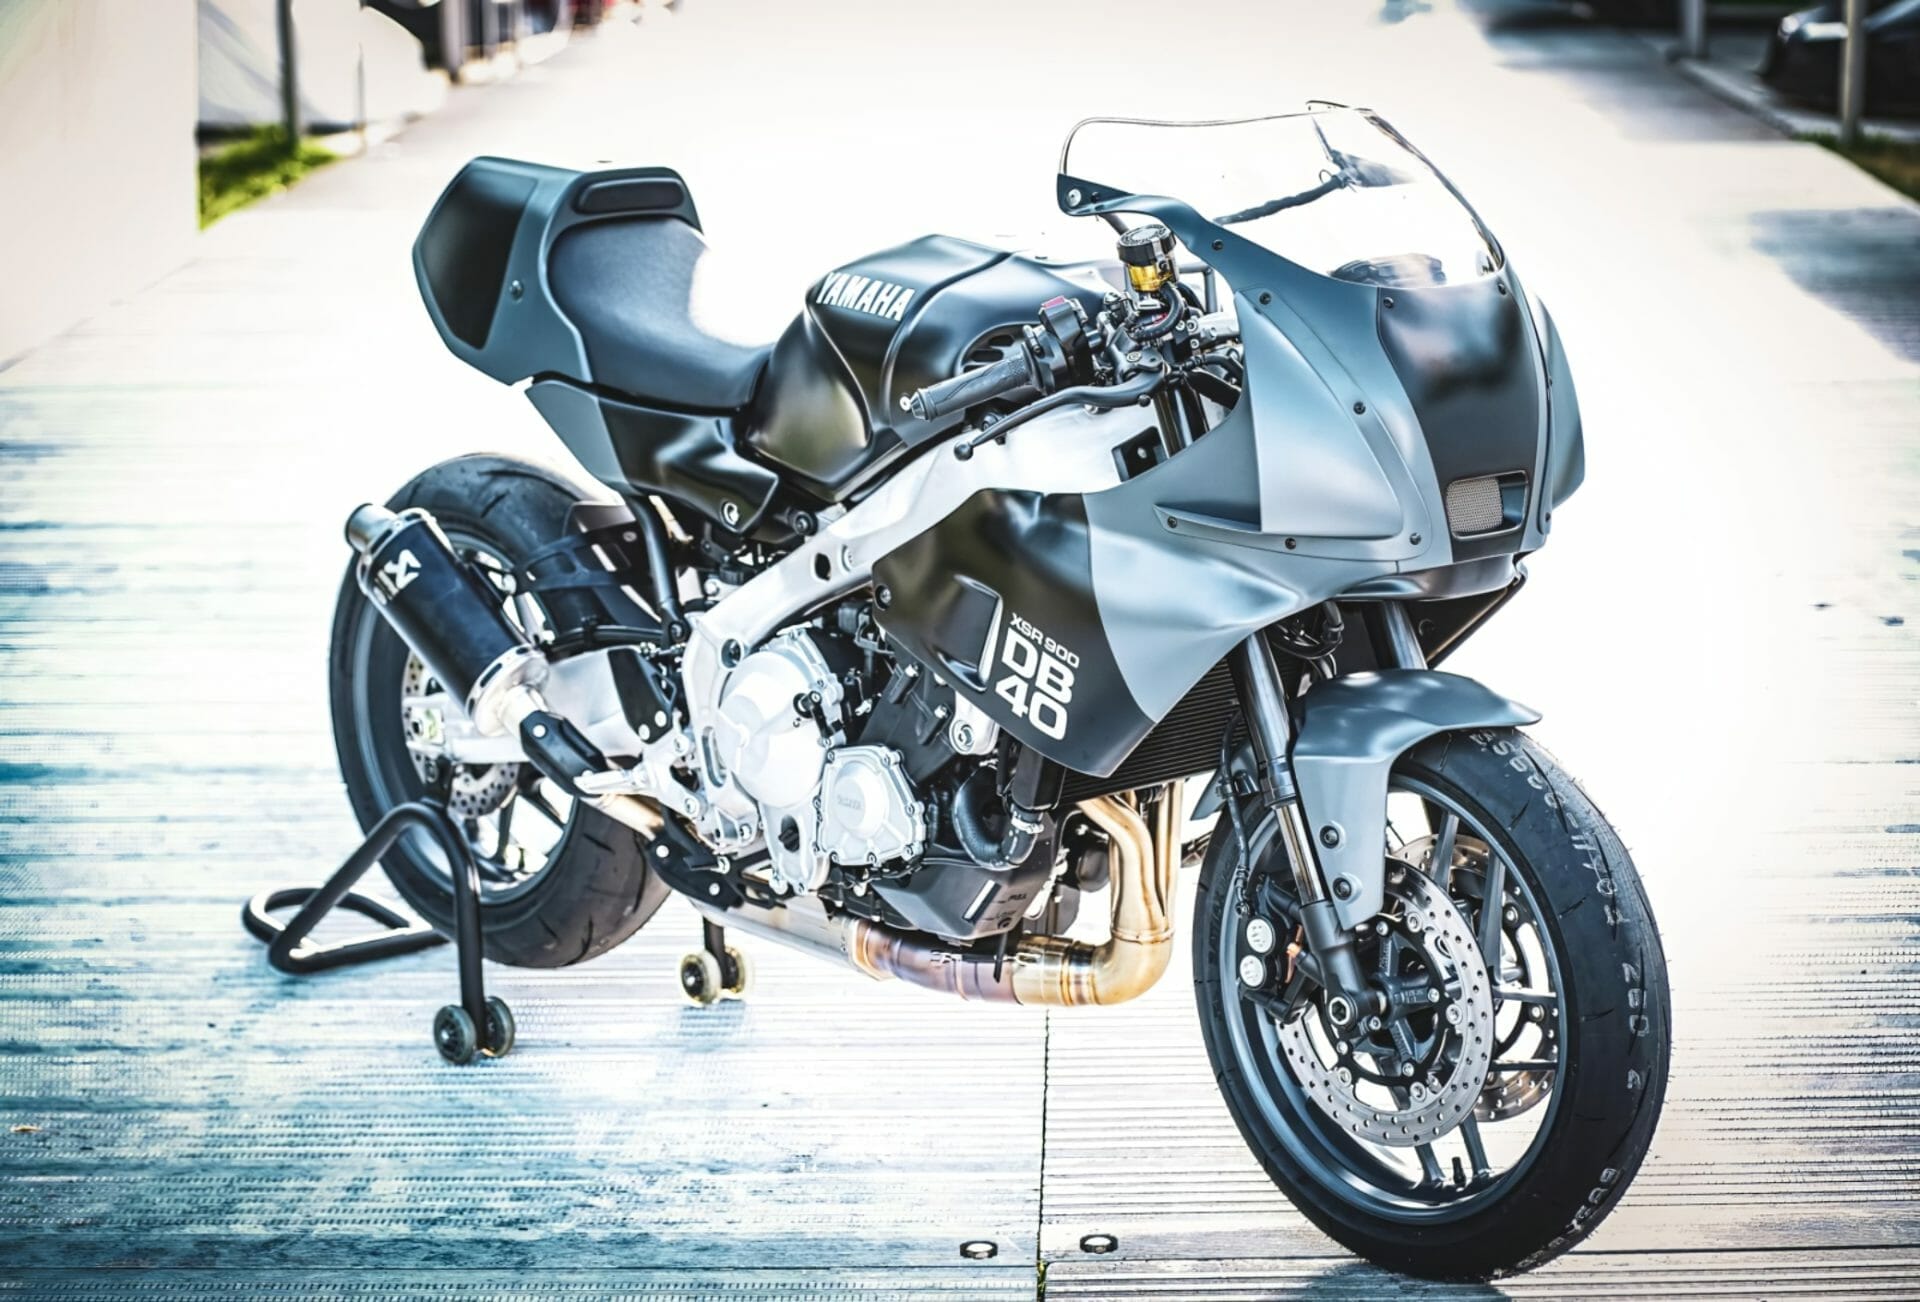 Yamaha XSR900 DB40 Prototype: The combination of racing tradition and state-of-the-art technology